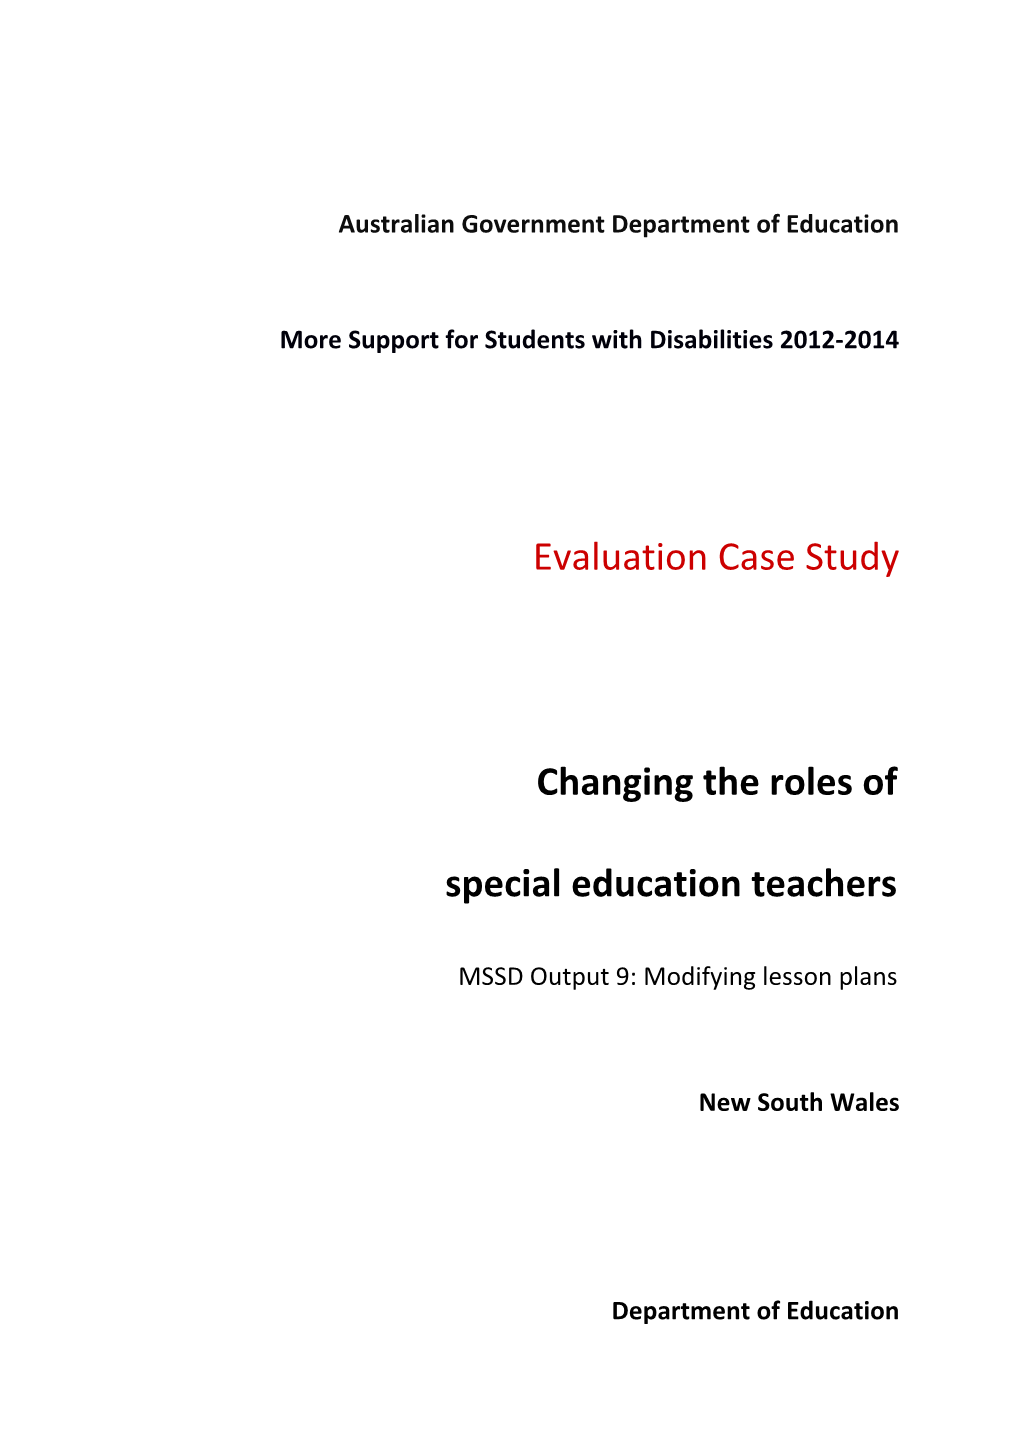 Changing Roles of Special Education Teachers in NSW Public Schools